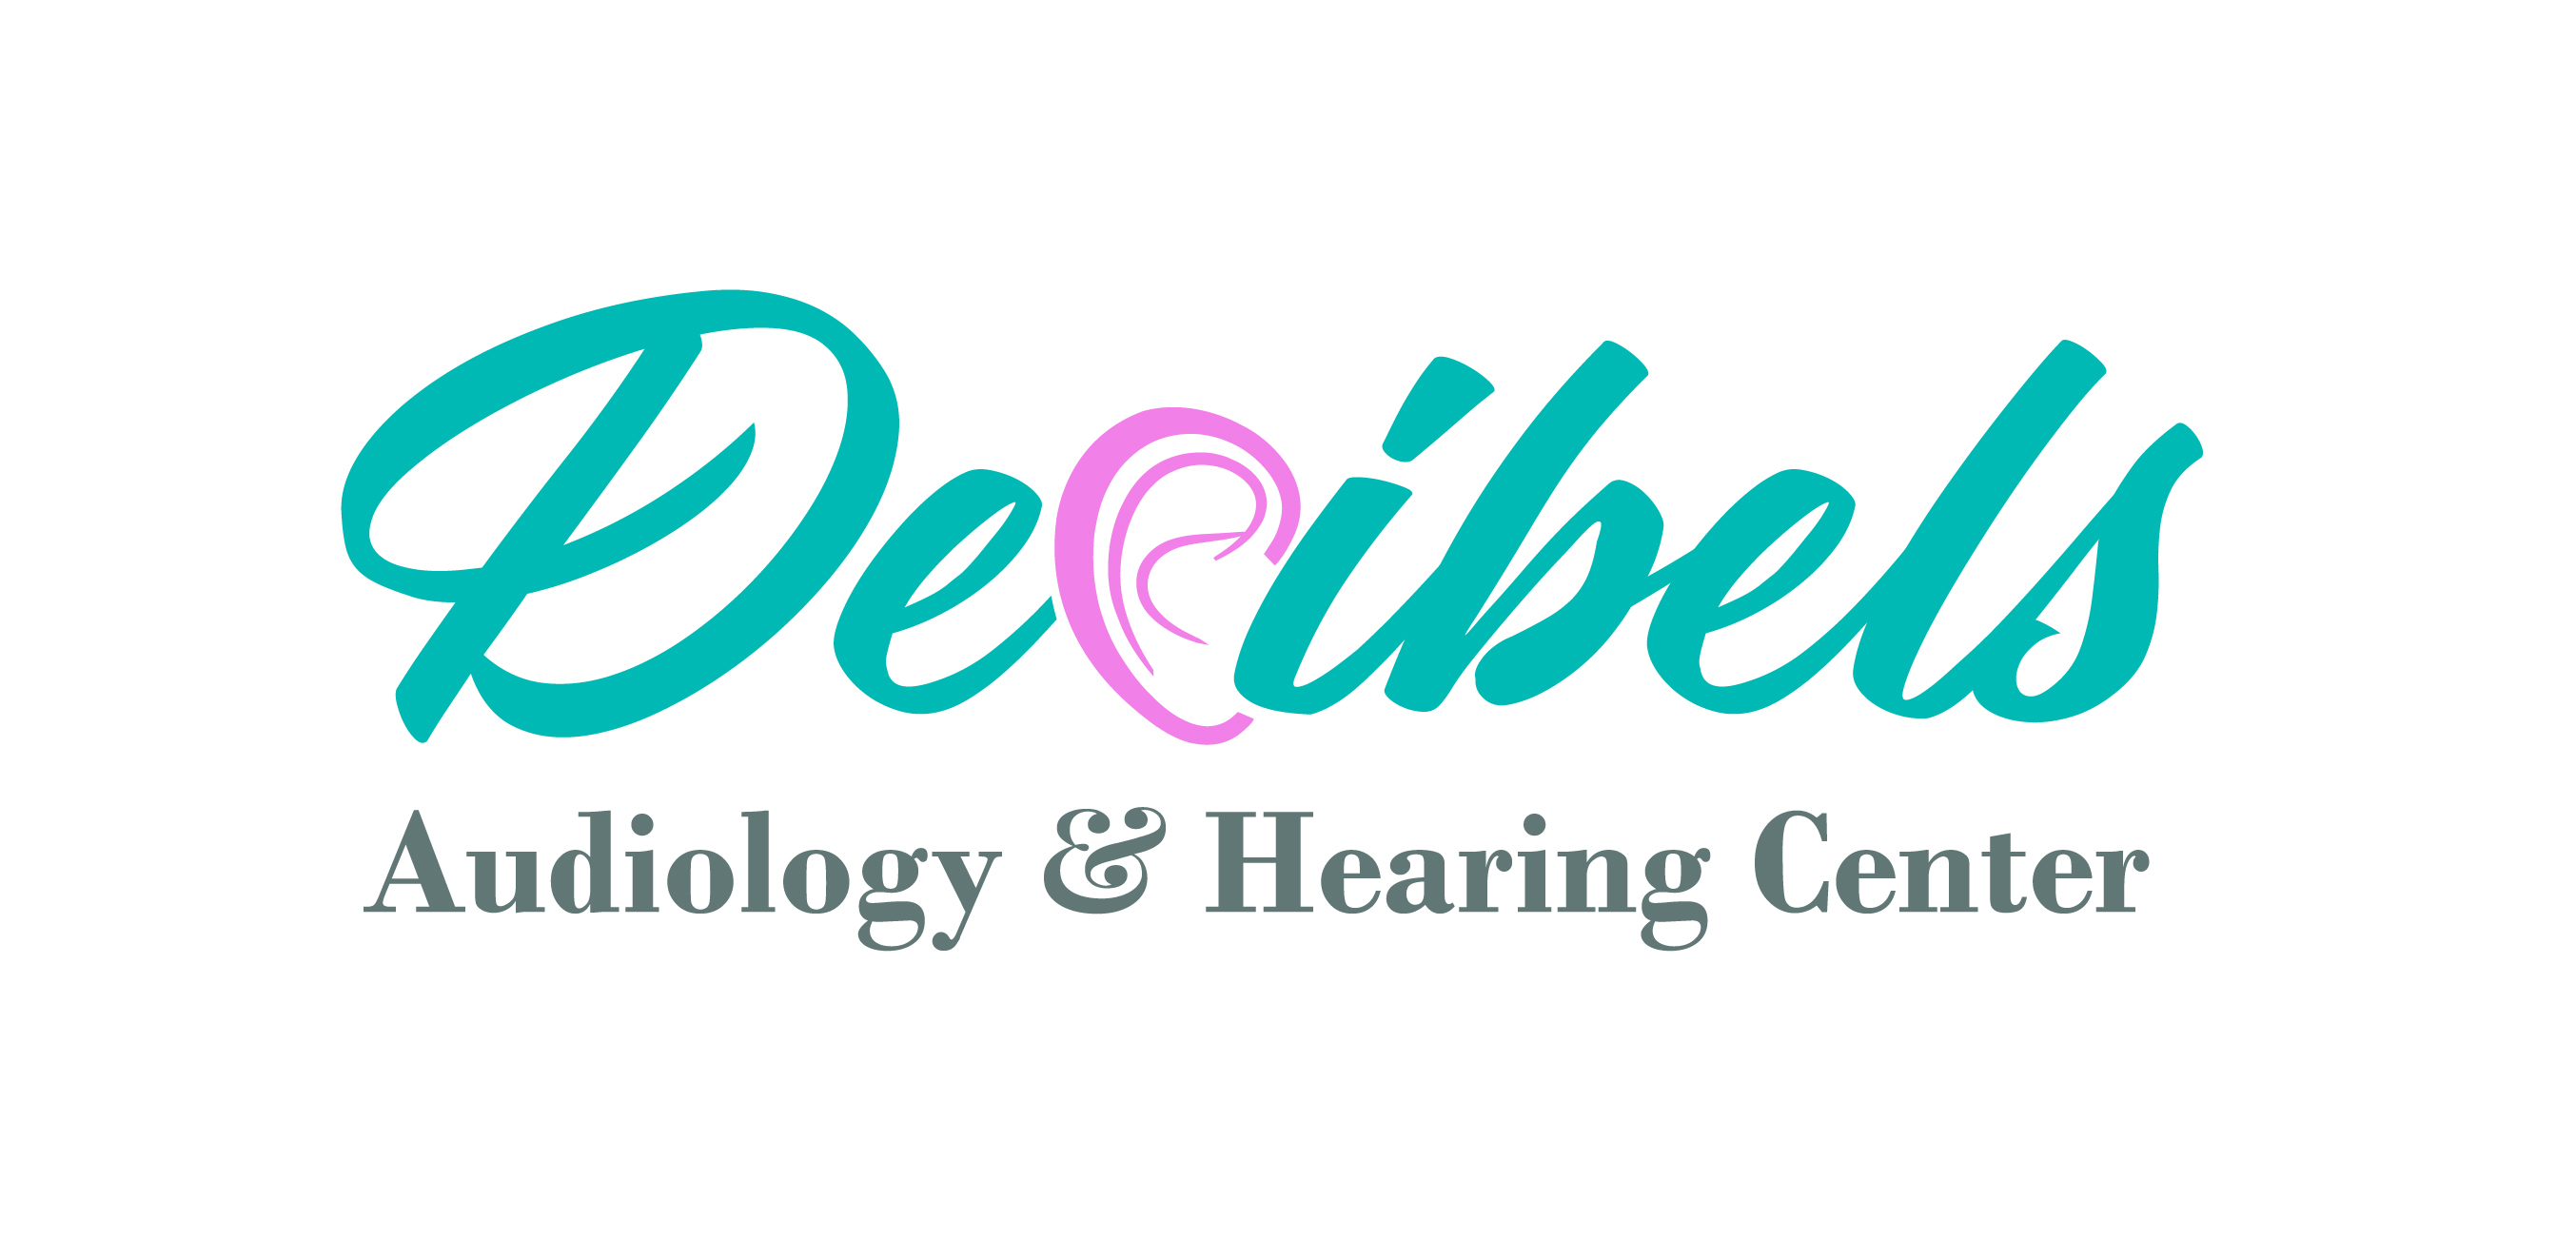 Part or Full Time Audiologist